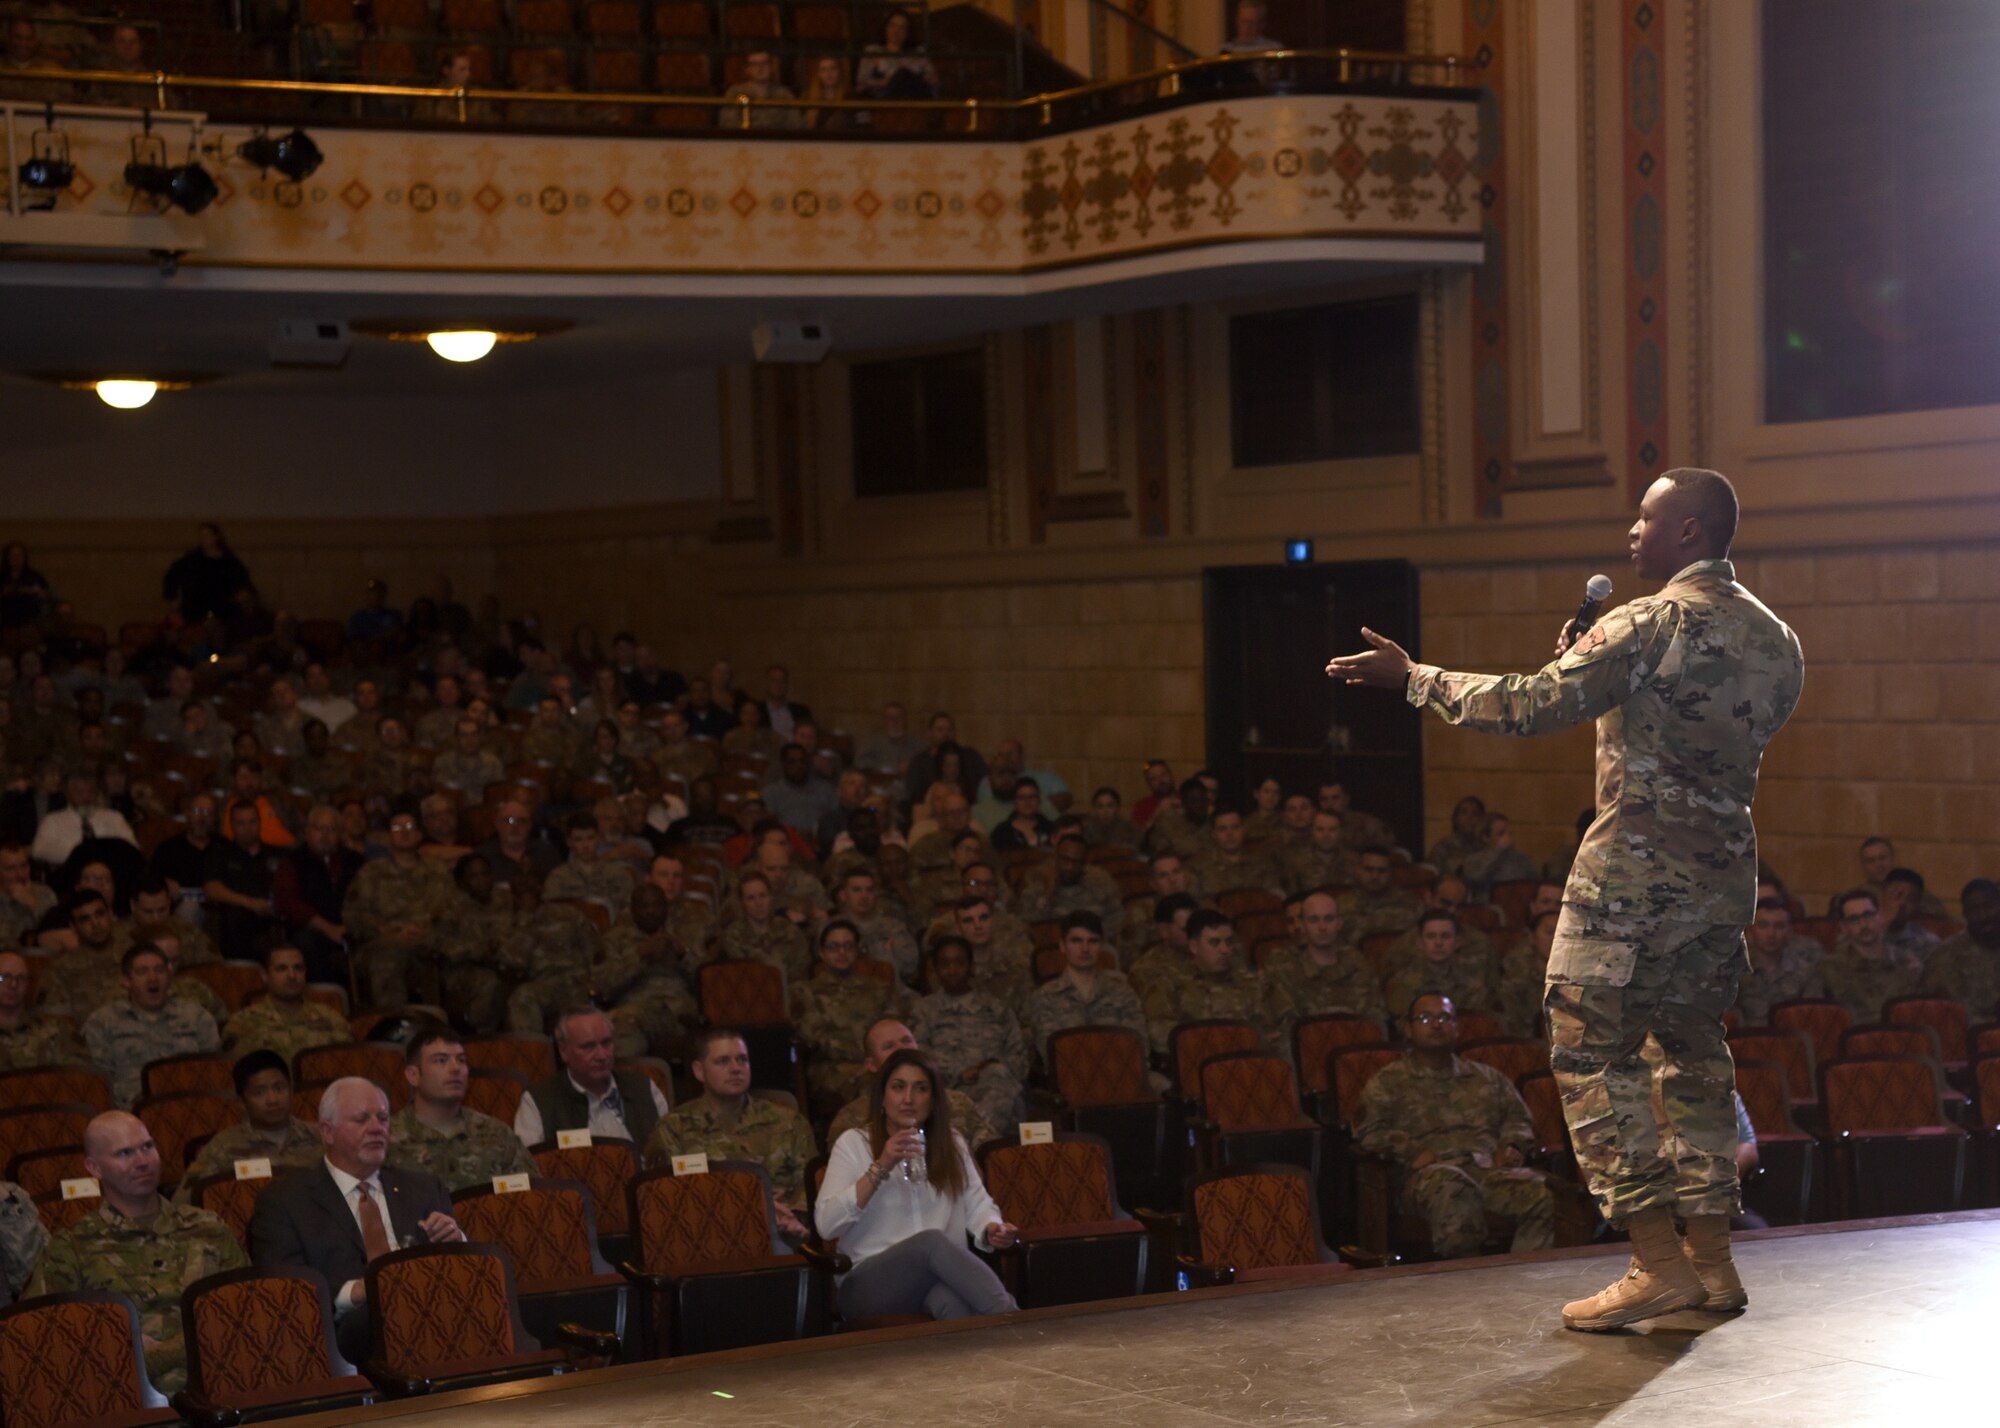 U.S. Air Force Chief Master Sgt. Lavor Kirkpatrick, 17th Training Wing command chief, prepares Goodfellow Air Force Base’s personnel and community members for the first Commander’s Call of the new year at the Murphey Performance Hall in San Angelo, Jan. 9, 2020. Kirkpatrick engaged the crowd with connecting activities and ice breakers before the event. (U.S. Air Force photo by Airman 1st Class Abbey Rieves)